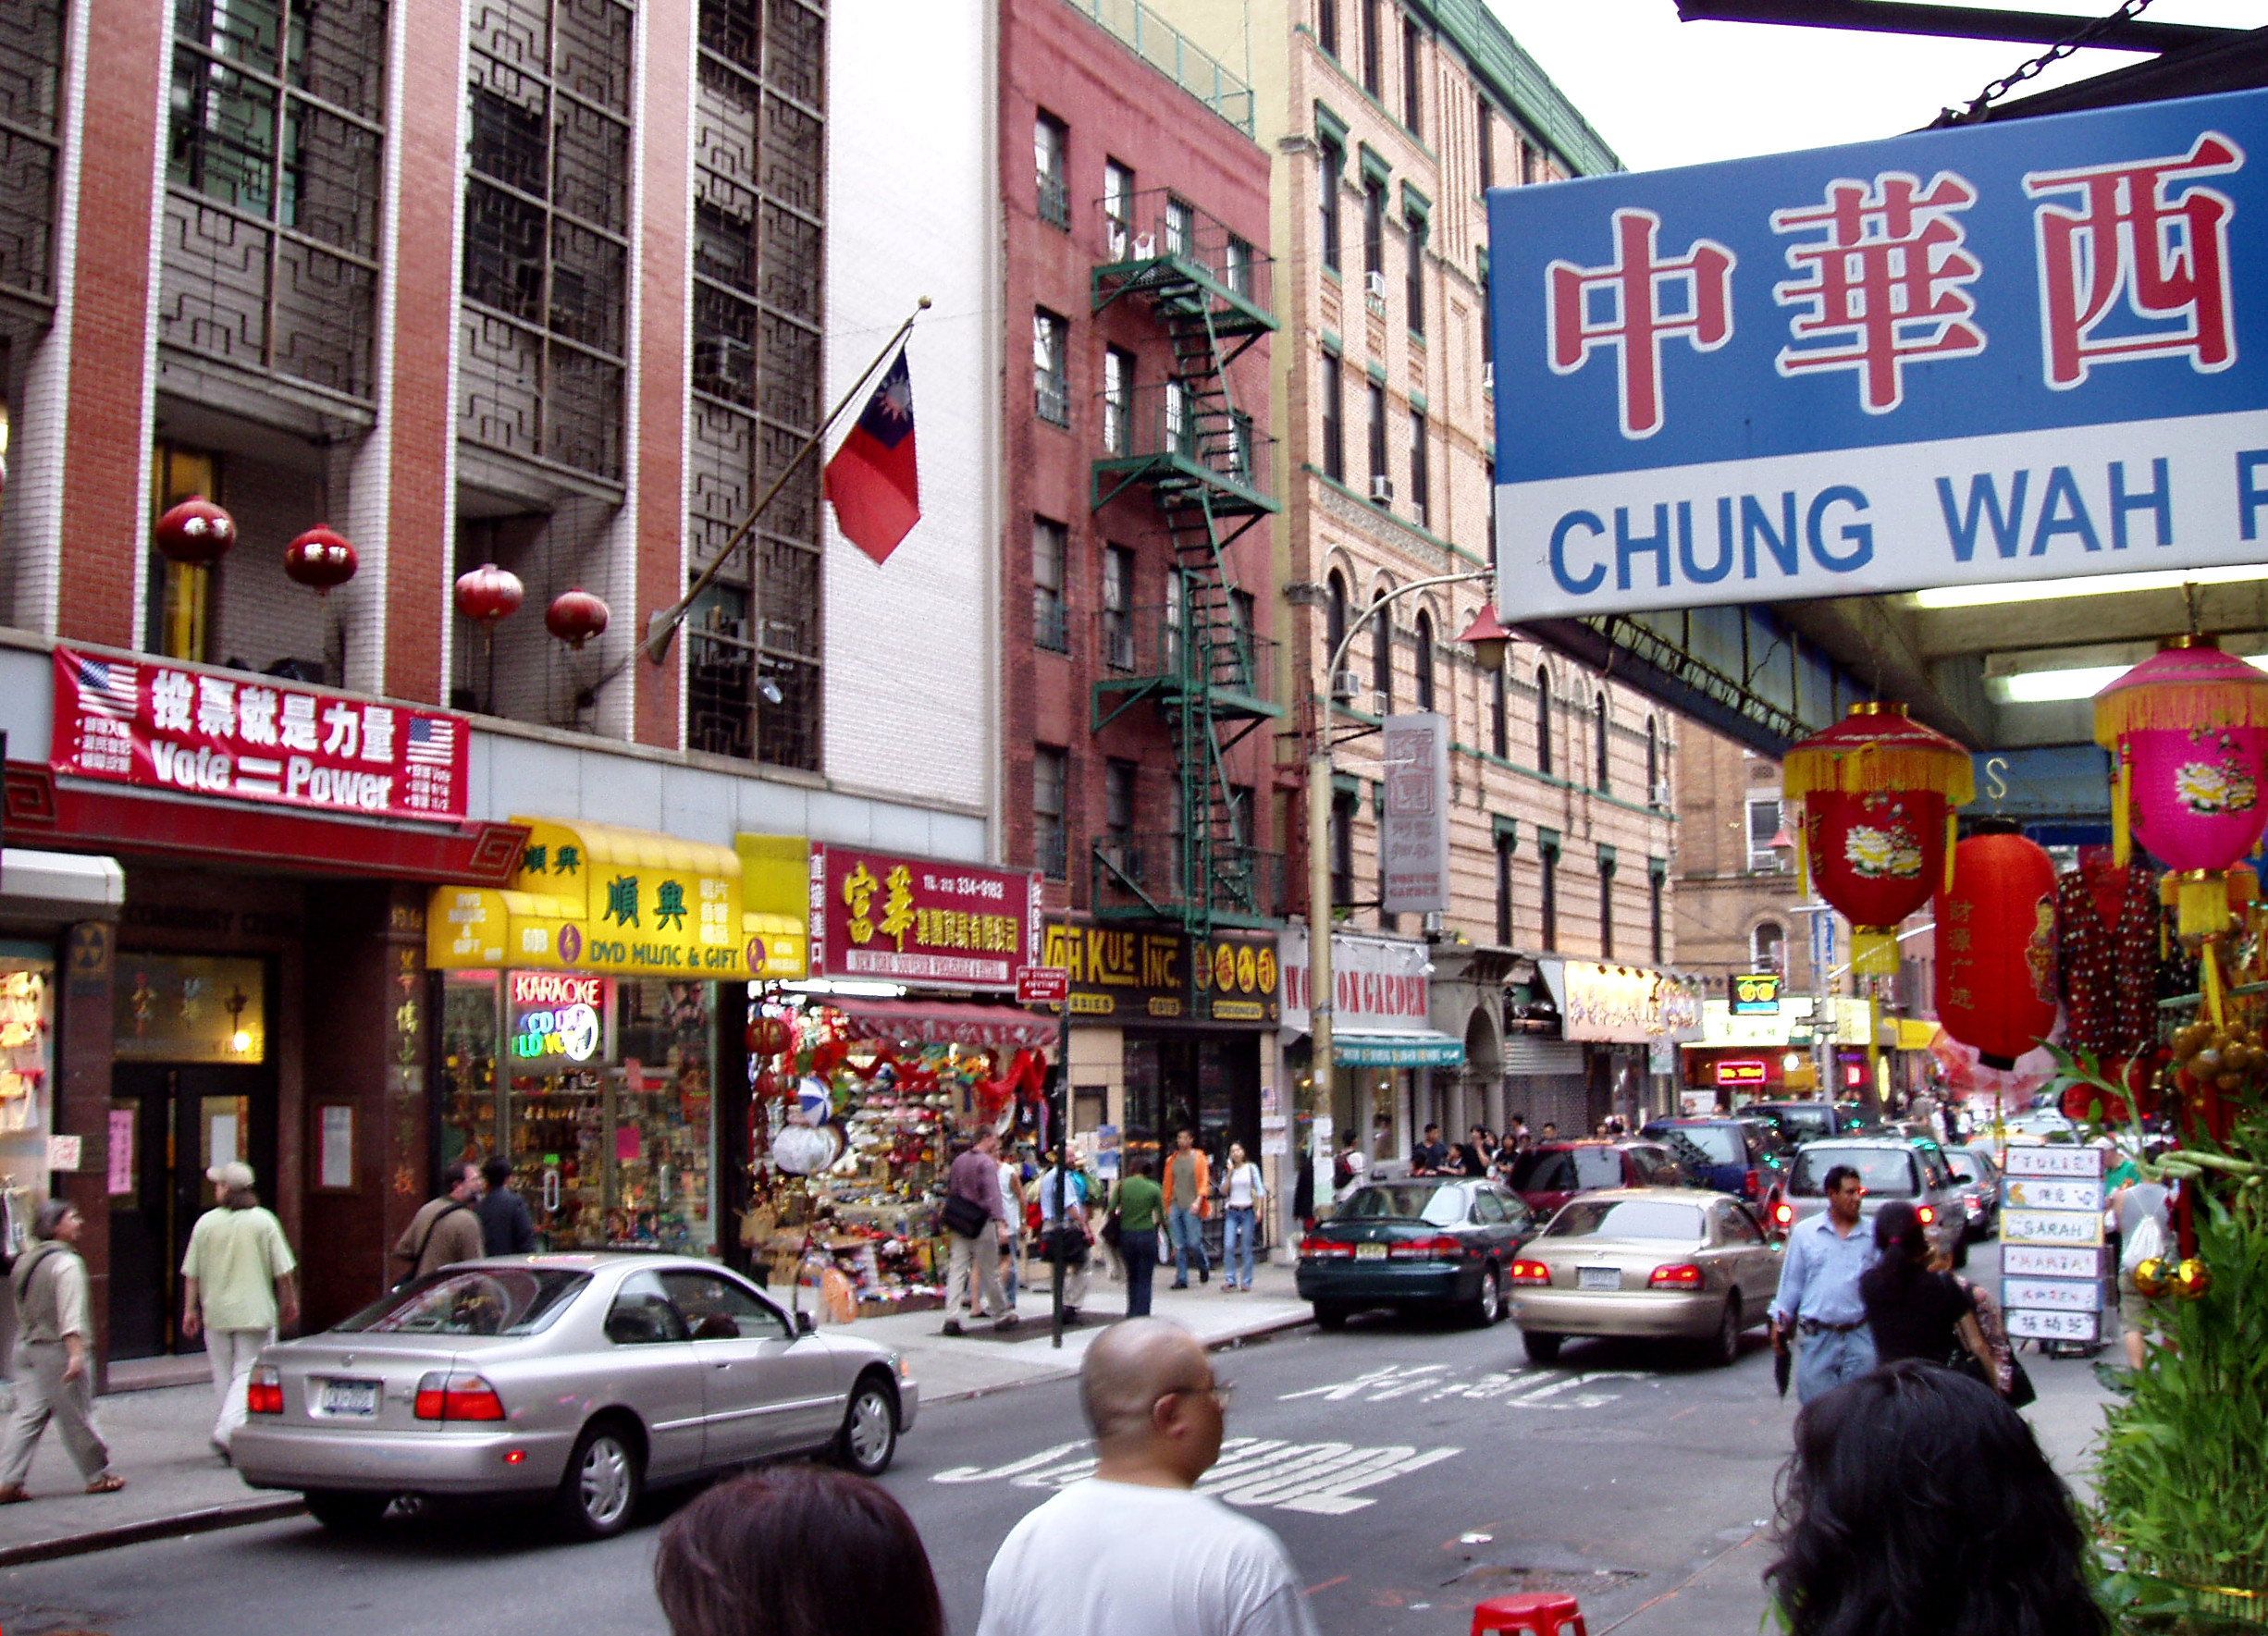 Colorful photos of Chinatown in New York City BOOMSbeat